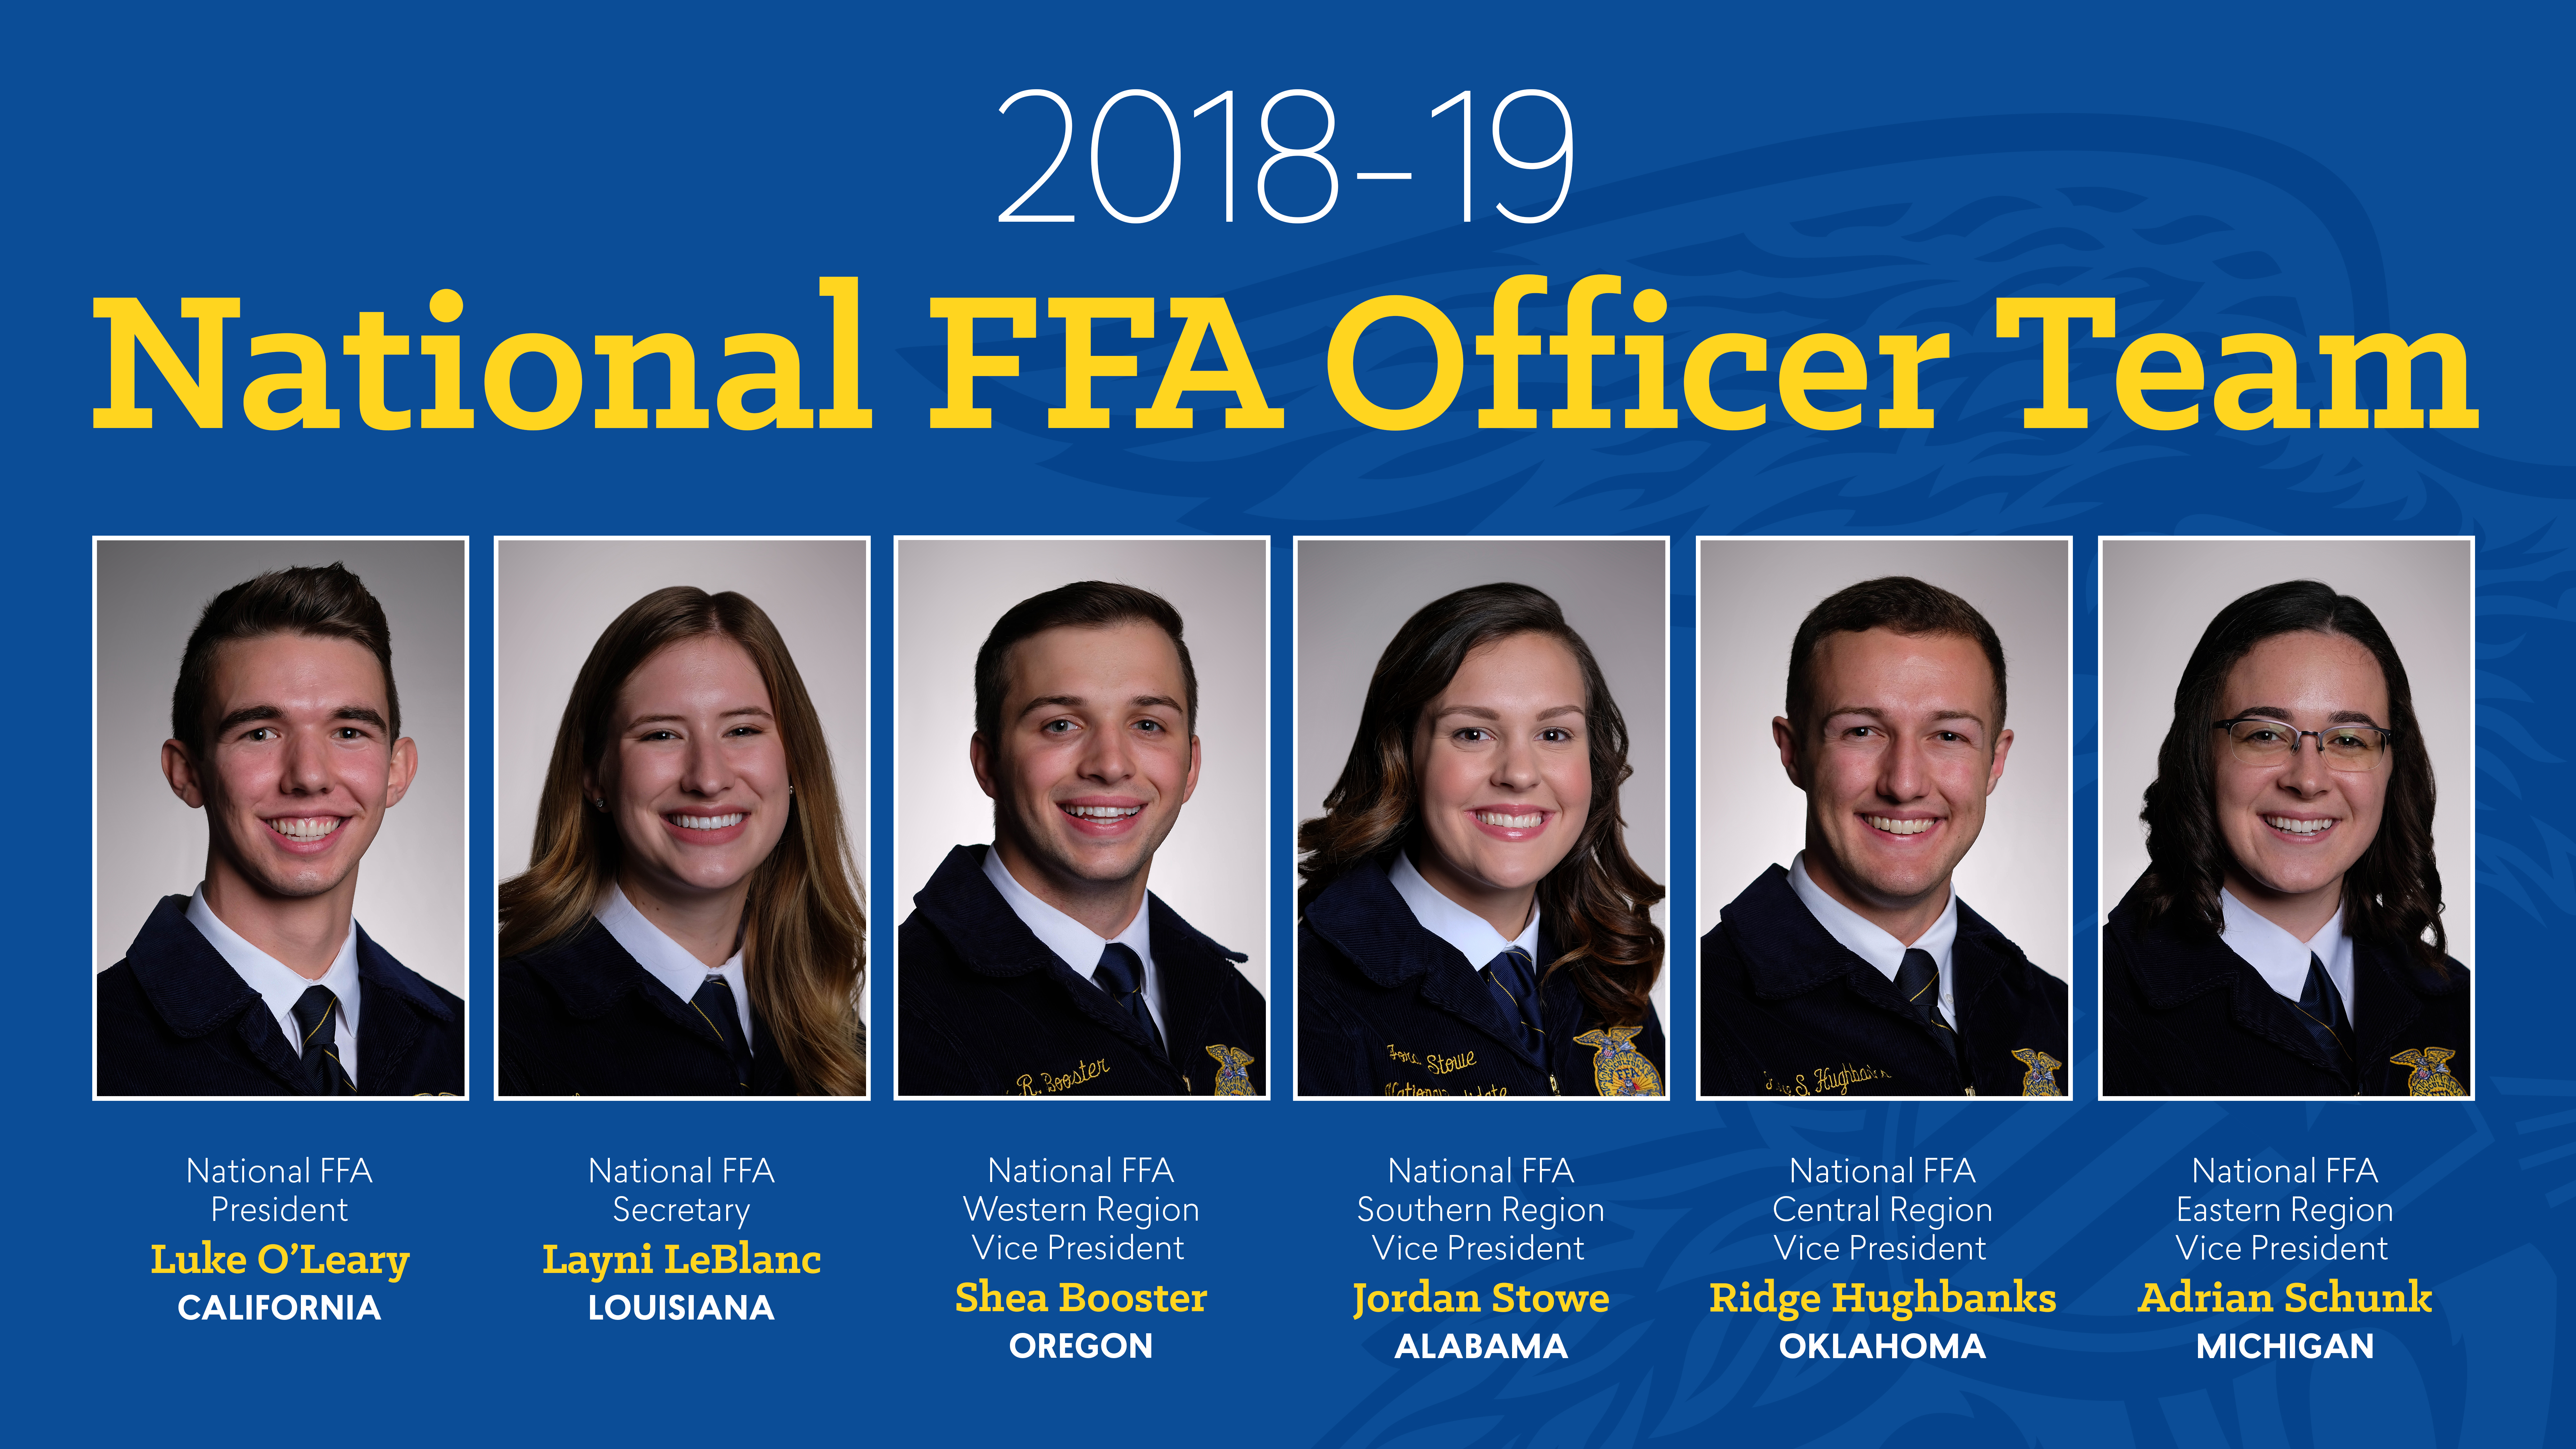 2018-19 National FFA Officer Team Elected at the 91st National FFA